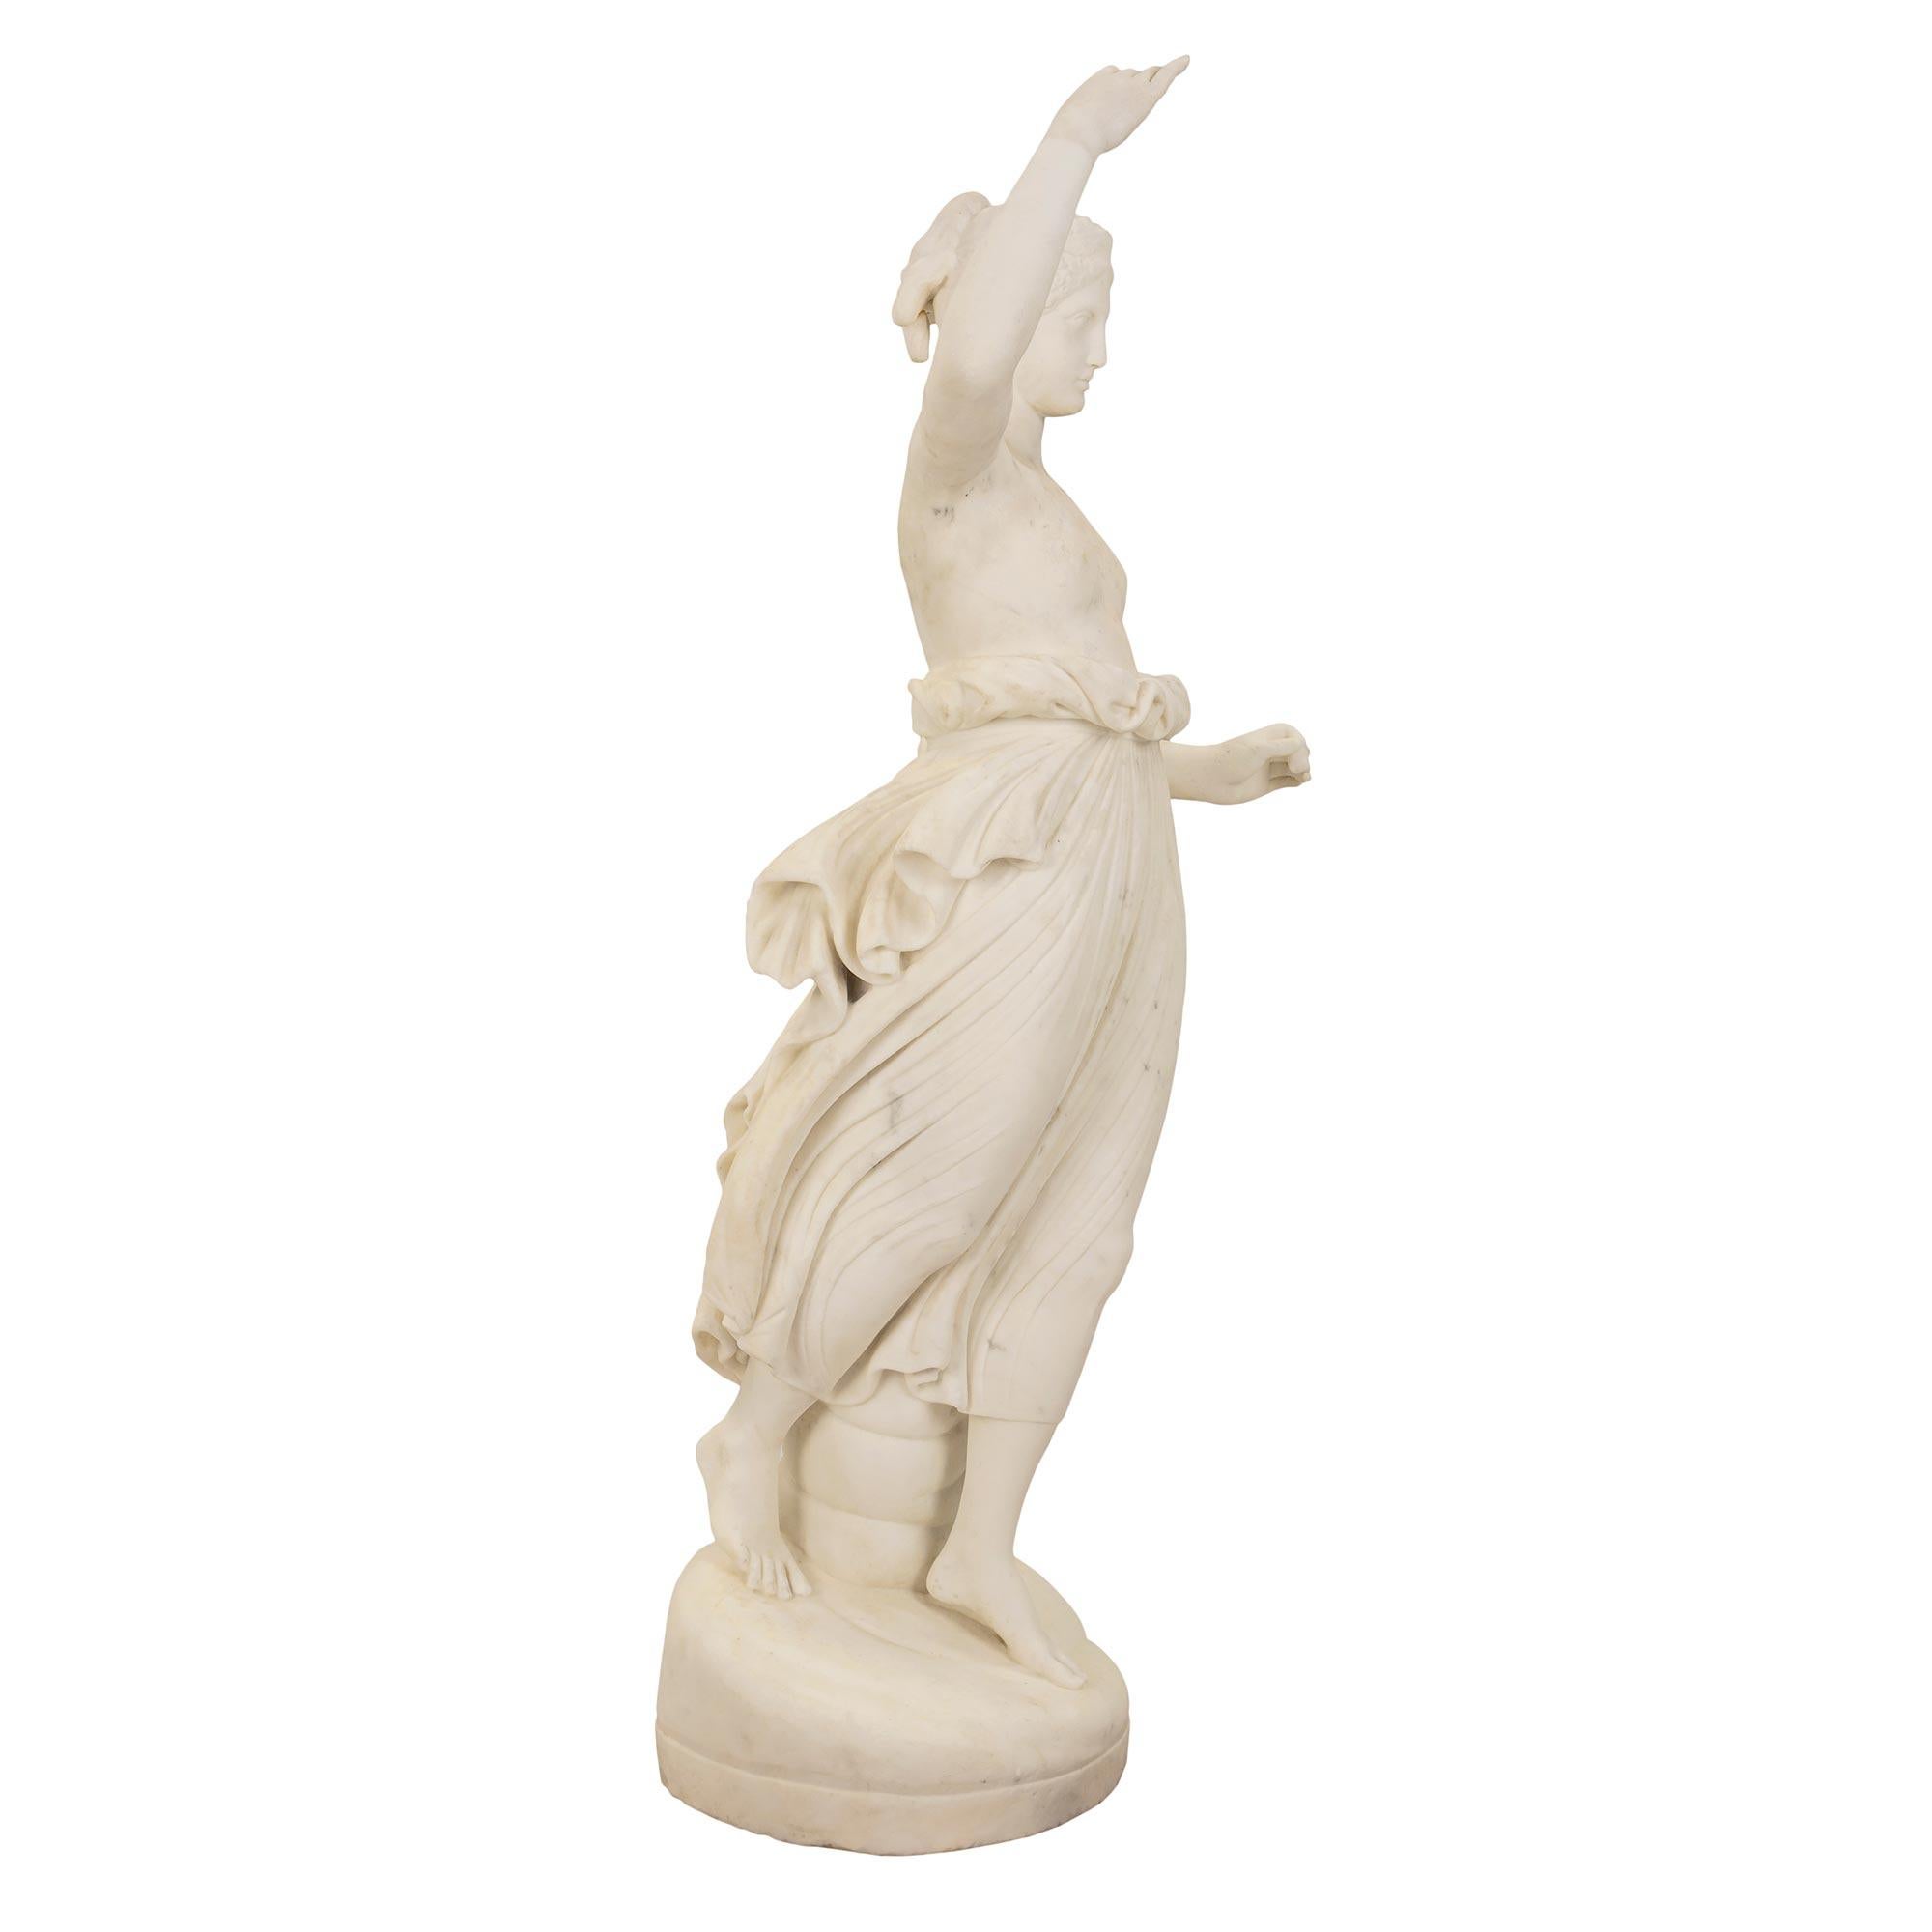 A very elegant Italian mid 19th century Neo-Classical st. white Carrara marble signed statue of Hebe, modeled after the original by Antonio Canova. Hebe stands on an oval shaped grotto base, dressed in classical drape tied at her waist. Both her